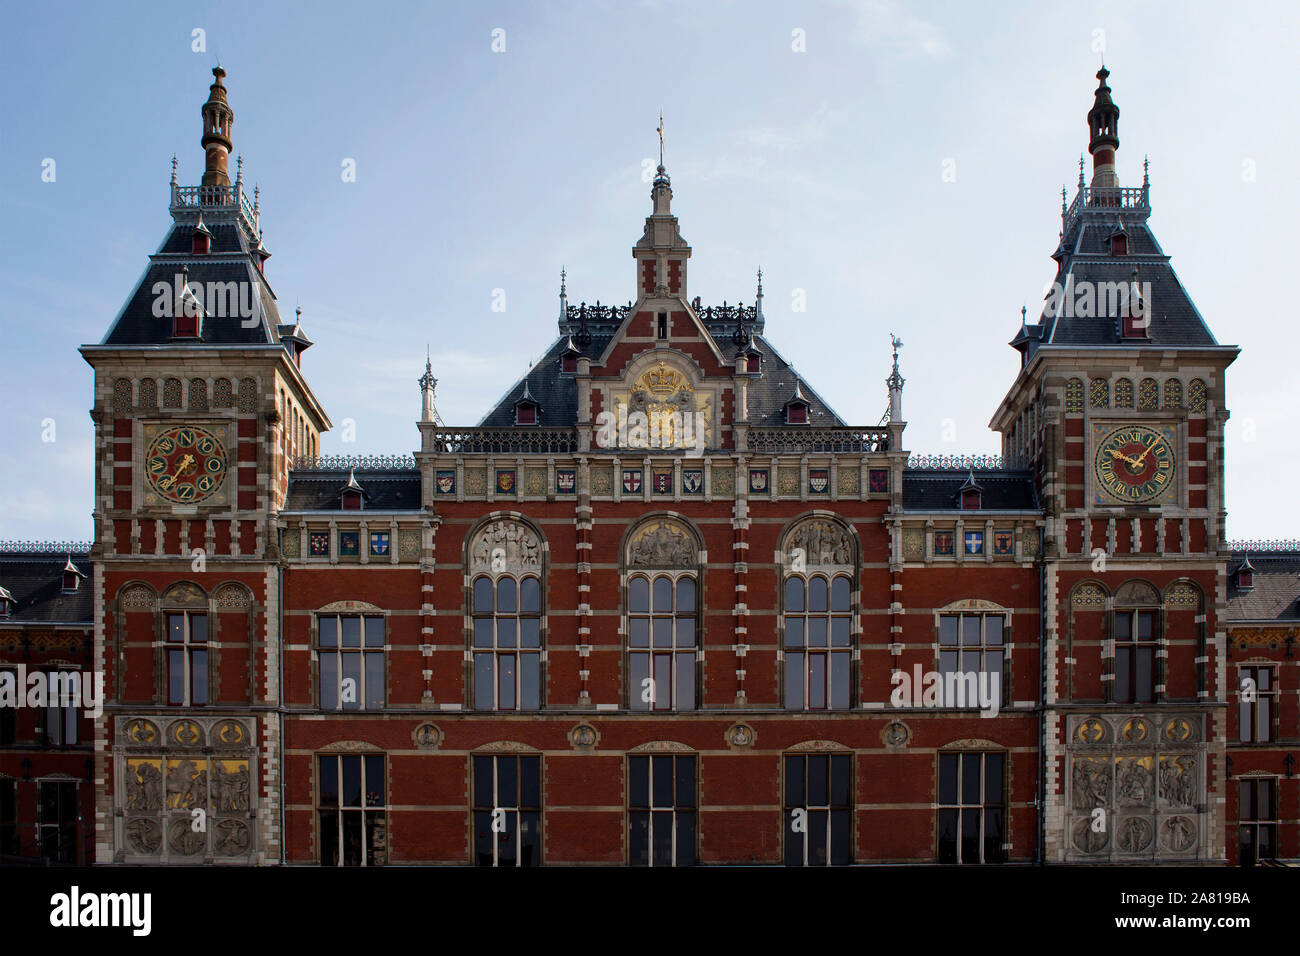 Close up facade view of main train station called Amsterdam Centraal. A major international railway hub, it is used by 162,000 passengers a day. It is Stock Photo